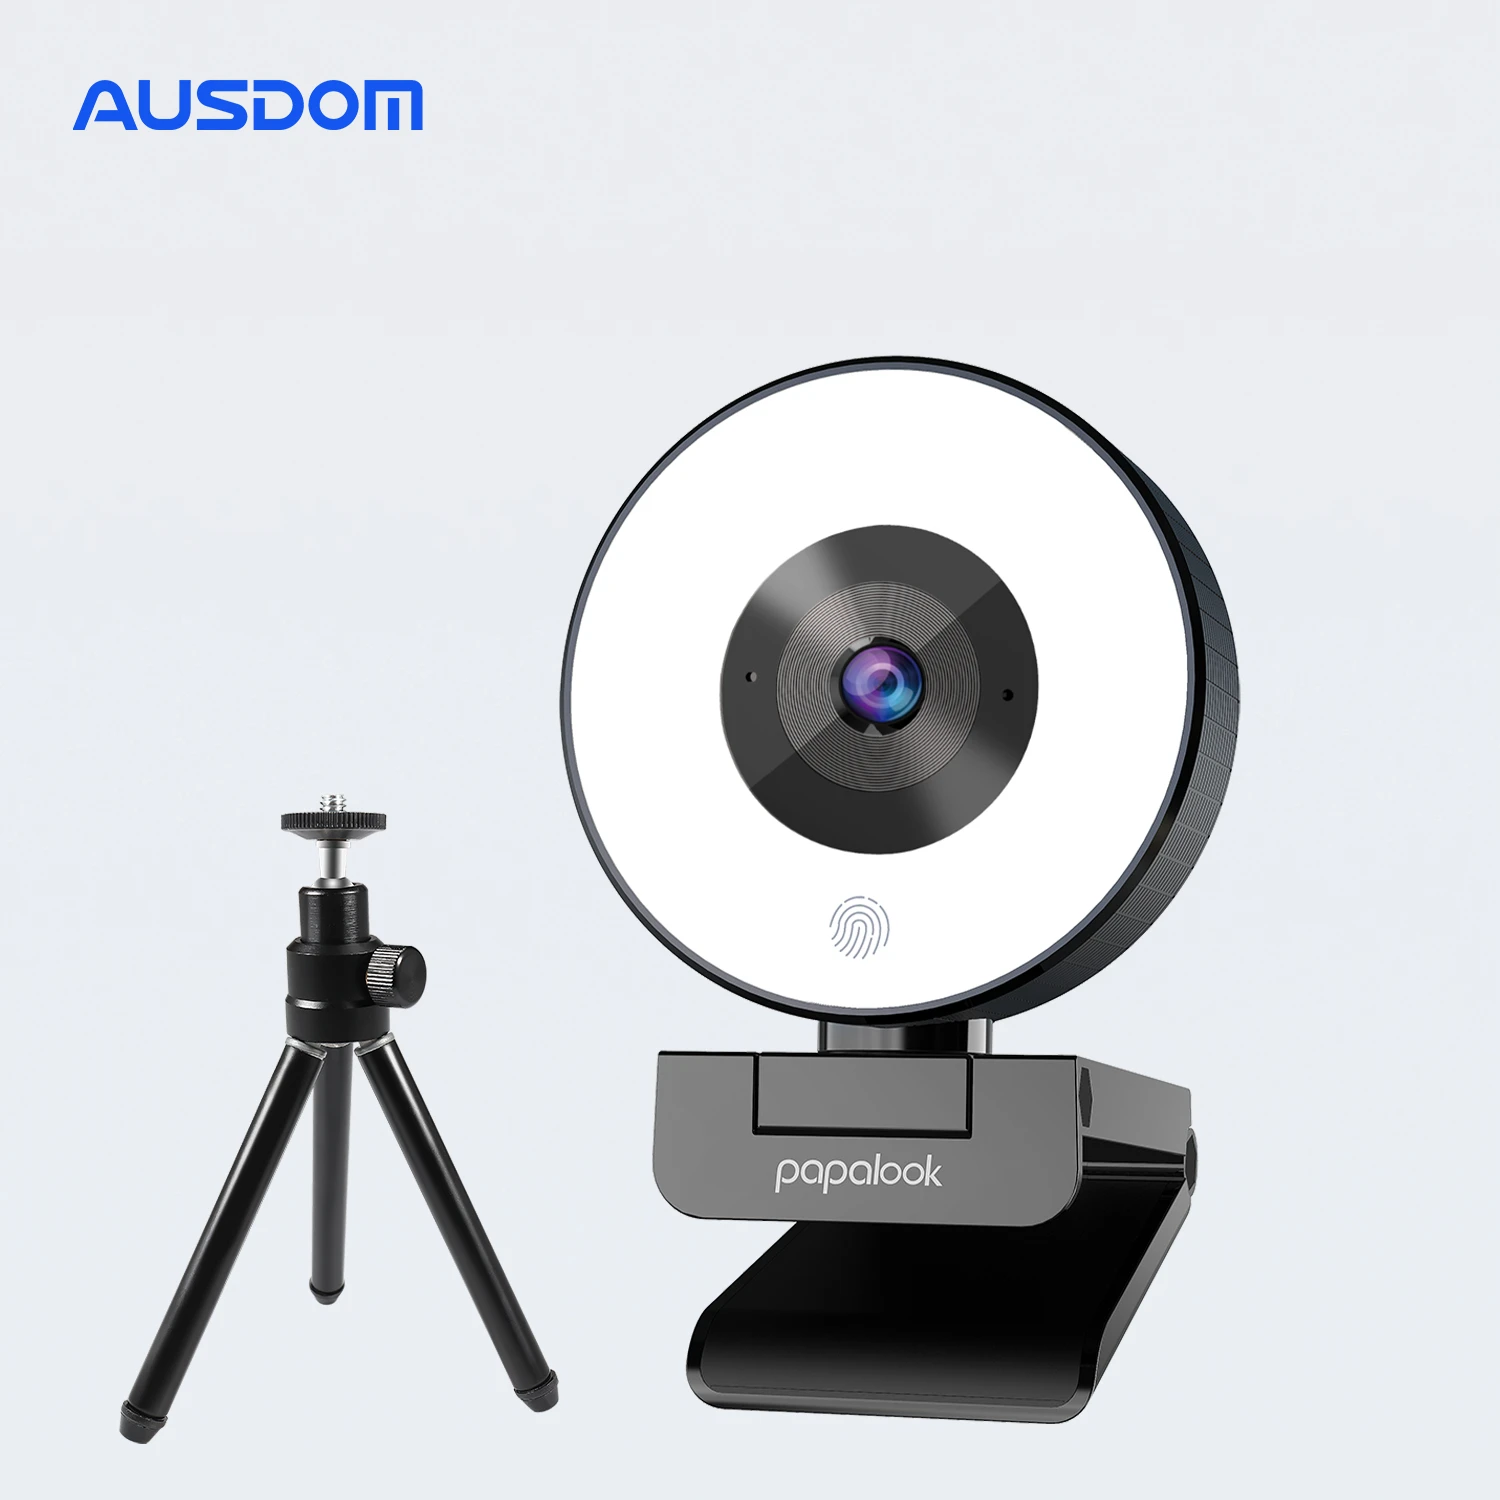 [Original]AUSDOM PA552 Webcam HD 1080P Fixed Focus USB Web Camera with Microphone Light Tripod for PC Twitch Skype OBS Steam